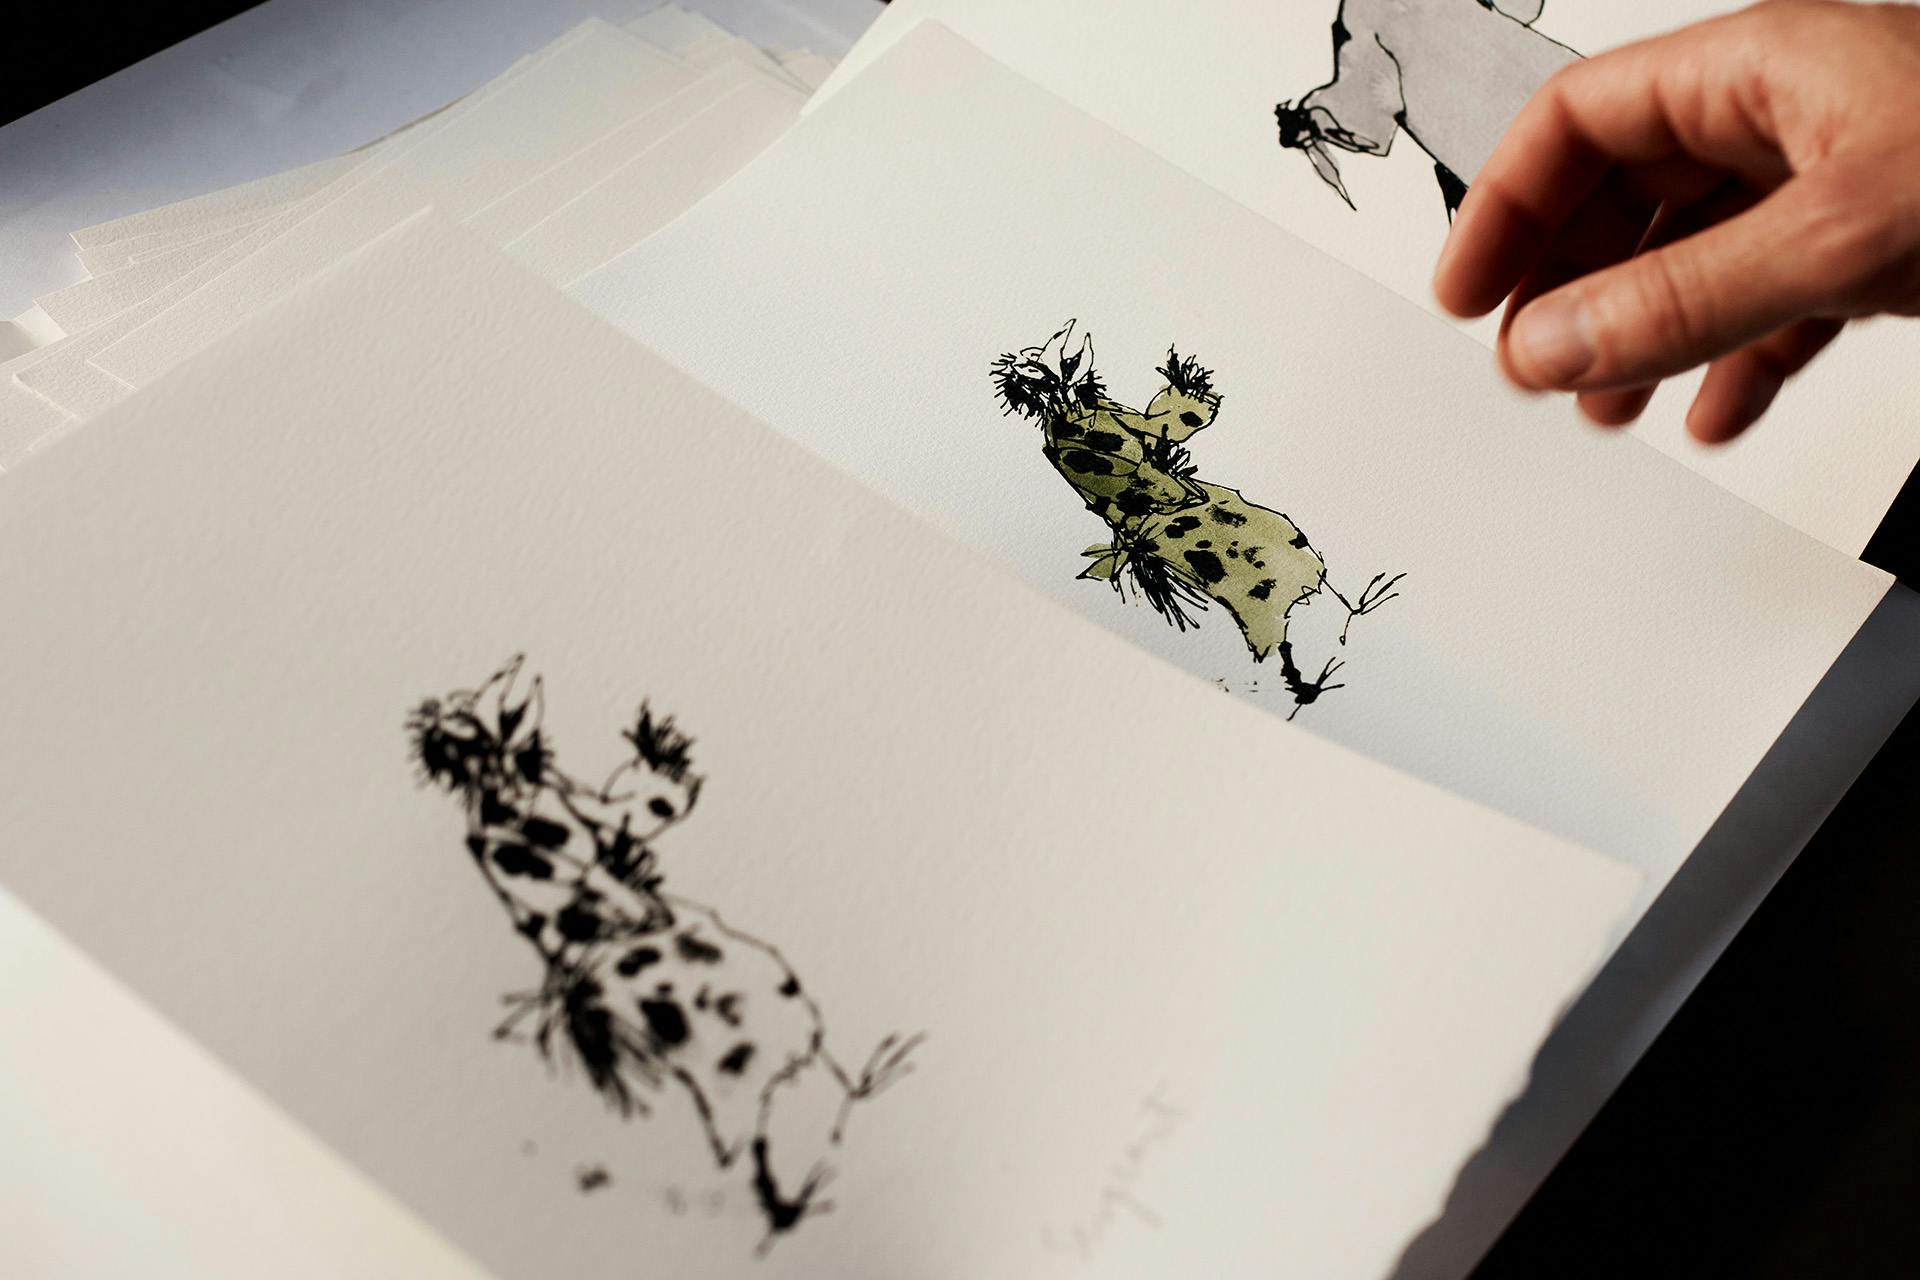 Photograph shows the evolution of an illustration by Quentin Blake, which shows a black and white drawing of a bird next to a colour version